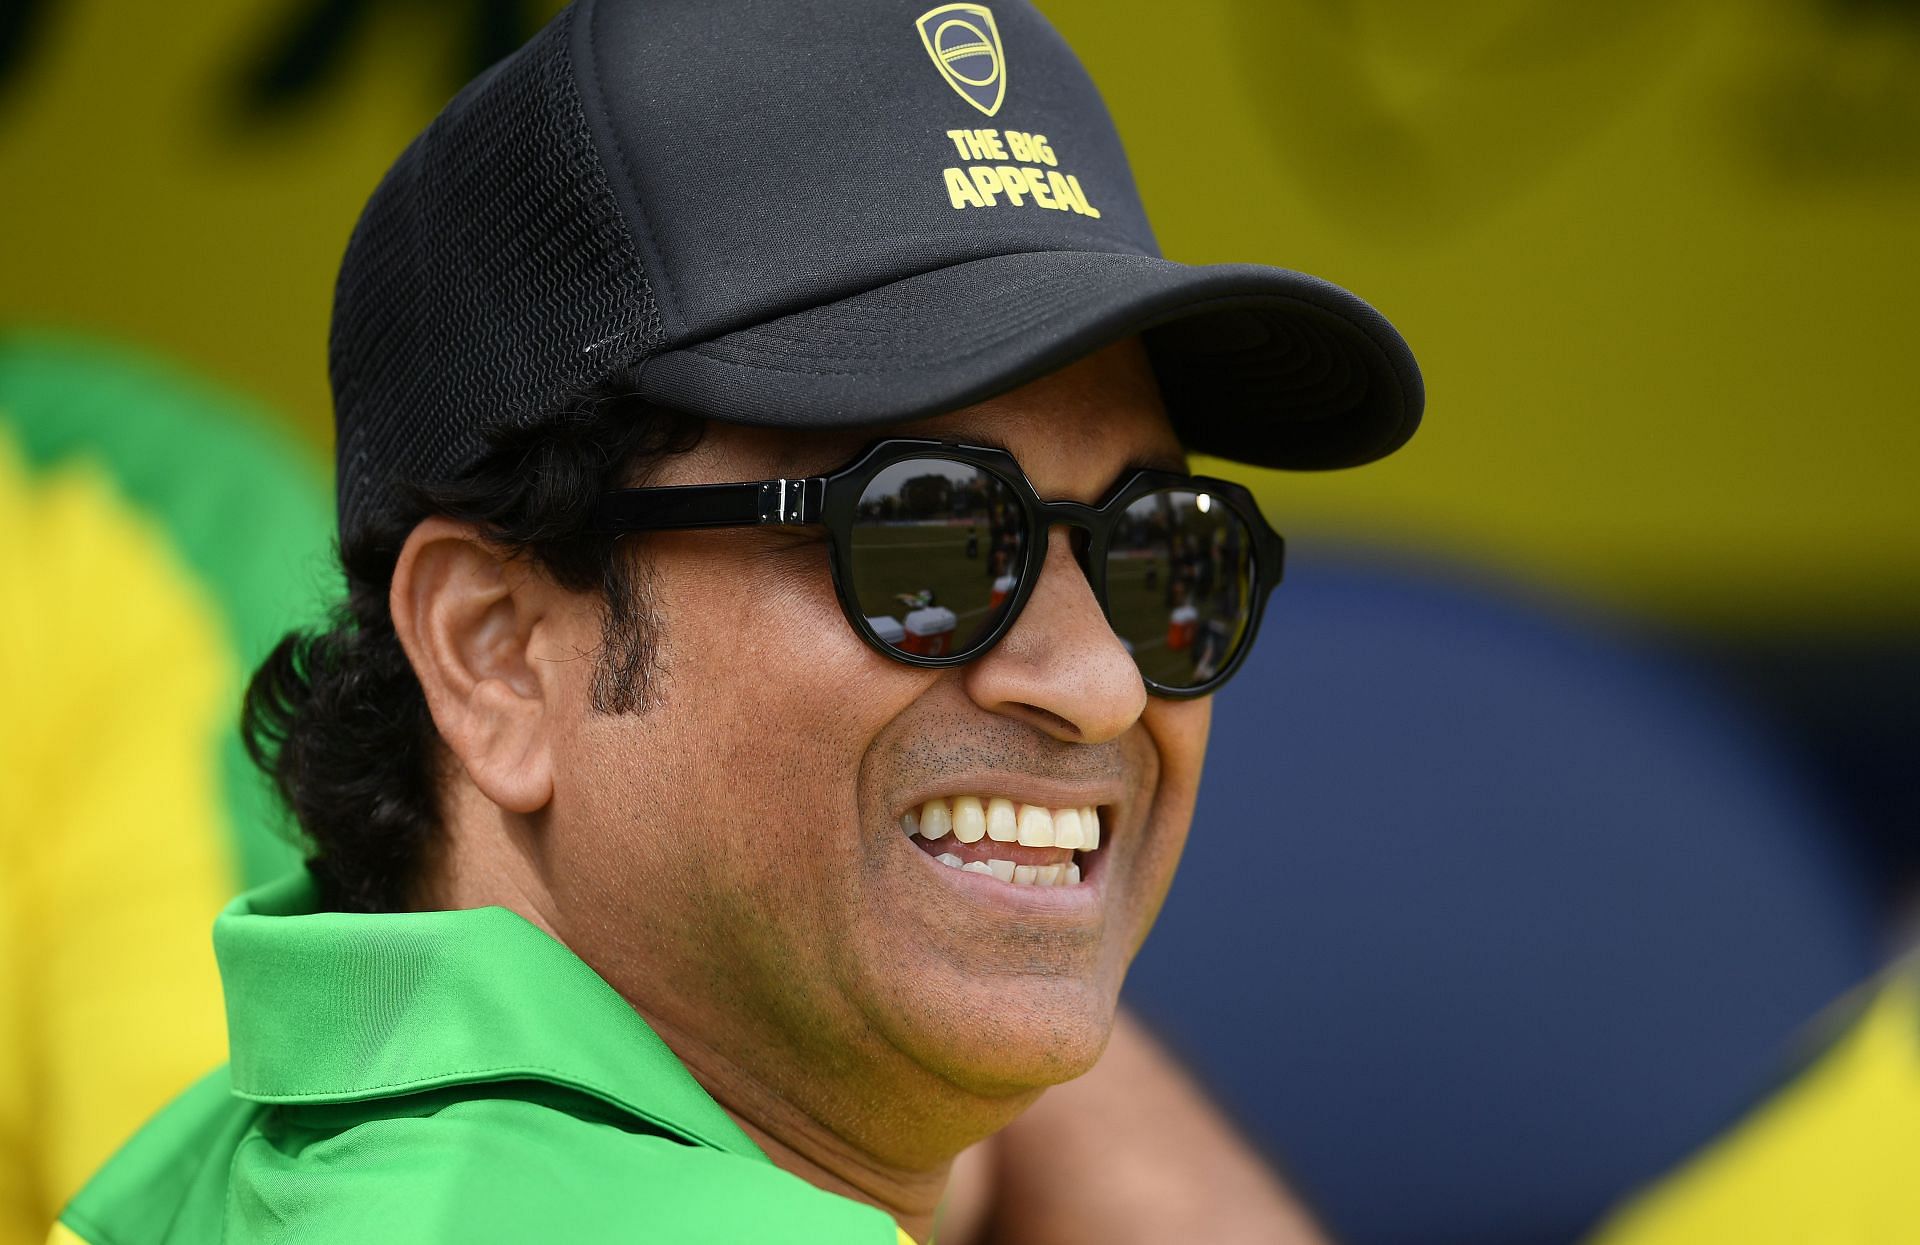 Sachin Tendulkar&rsquo;s fan following hasn&rsquo;t diminished even post-retirement. (Pic: Getty Images)